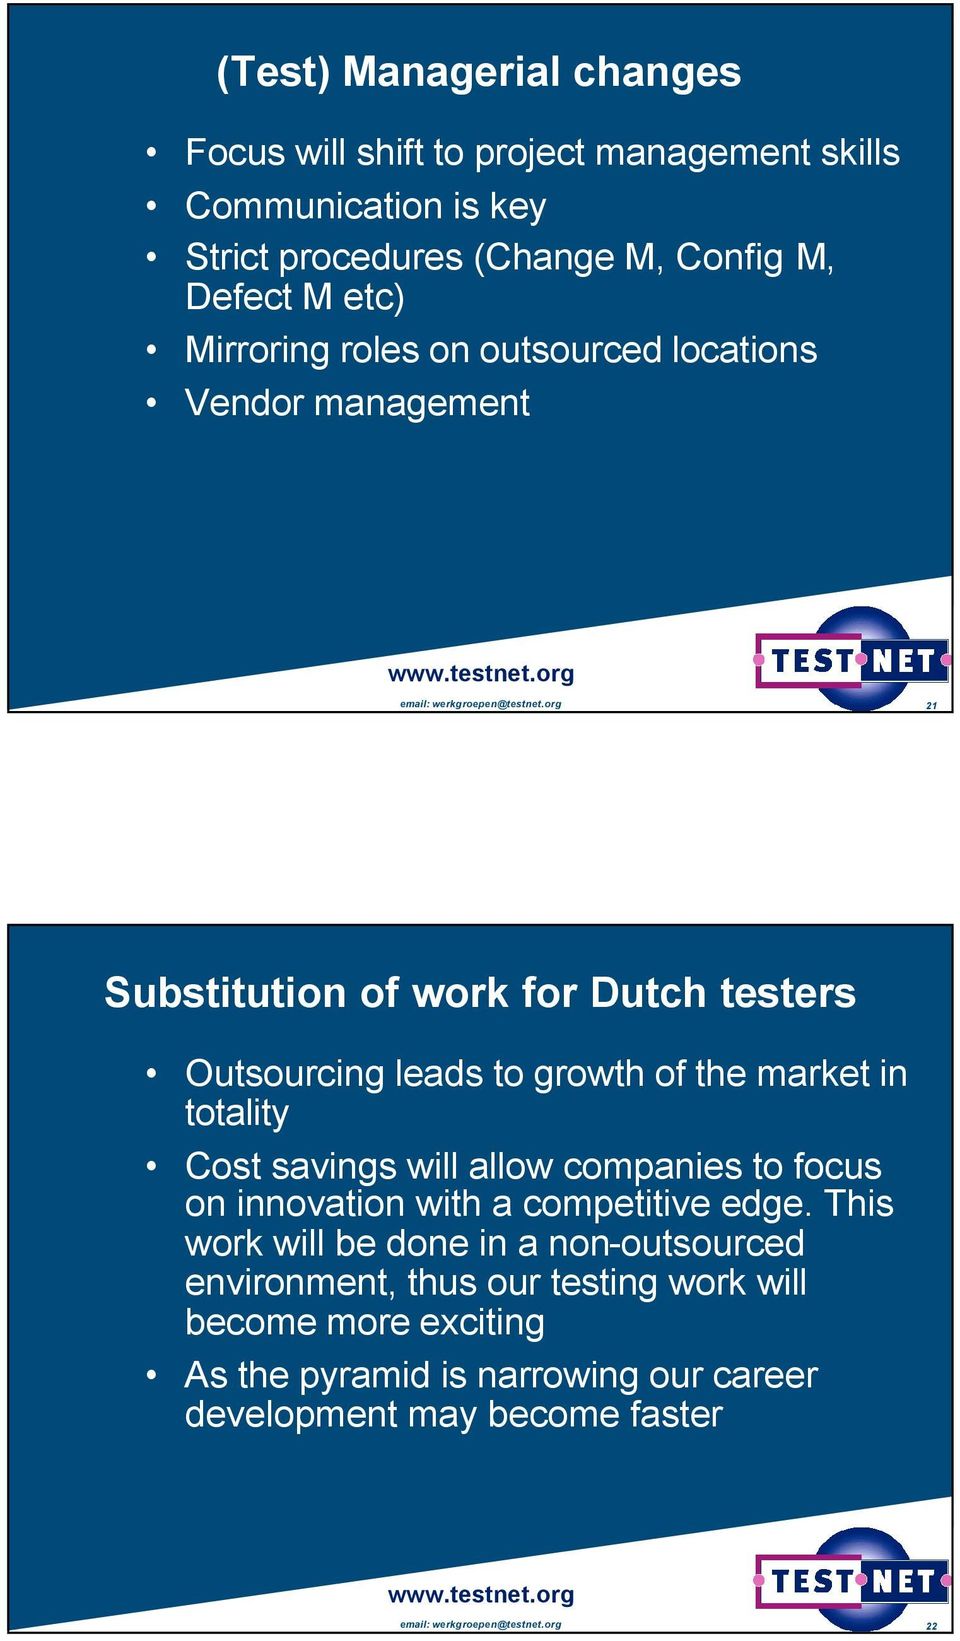 org 21 Substitution of work for Dutch testers Outsourcing leads to growth of the market in totality Cost savings will allow companies to focus on